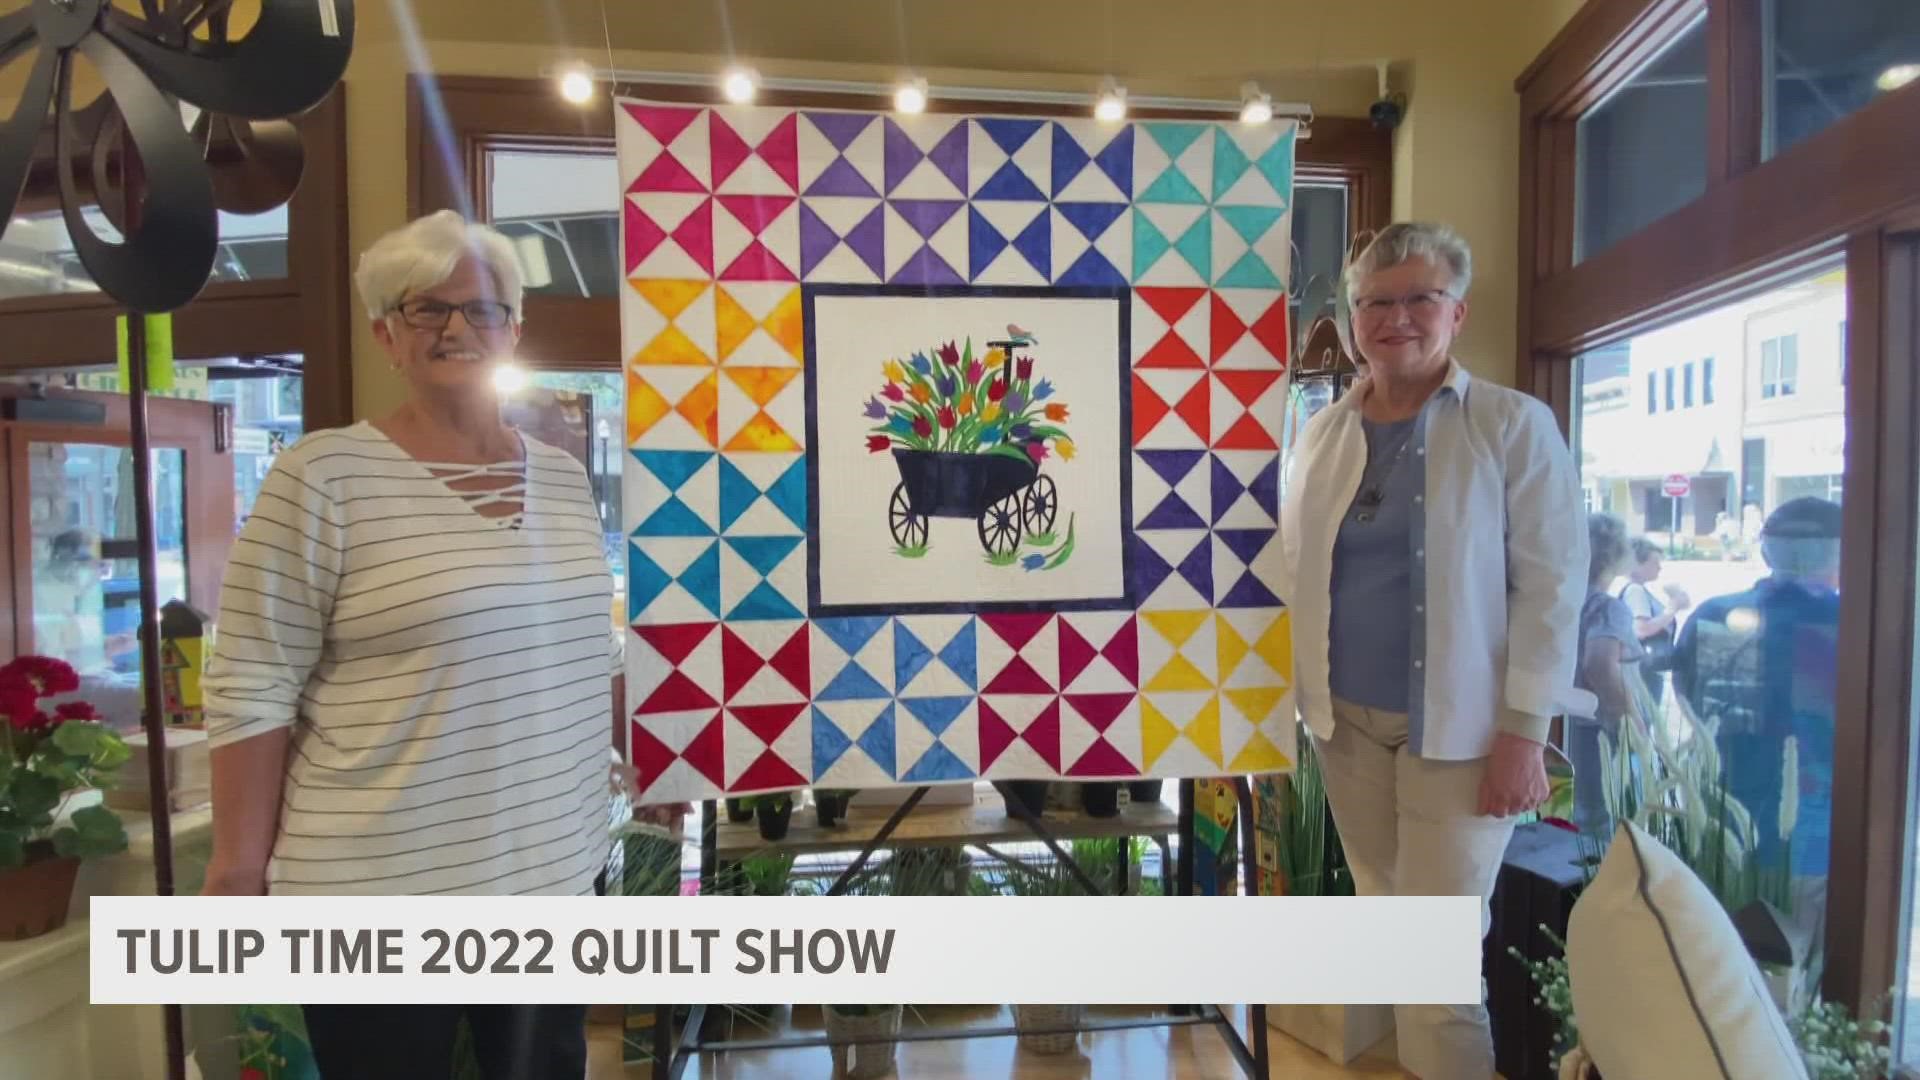 Tulip Time's quilt show is back. Each quilt shows the art and skill that takes hours and hours to complete.